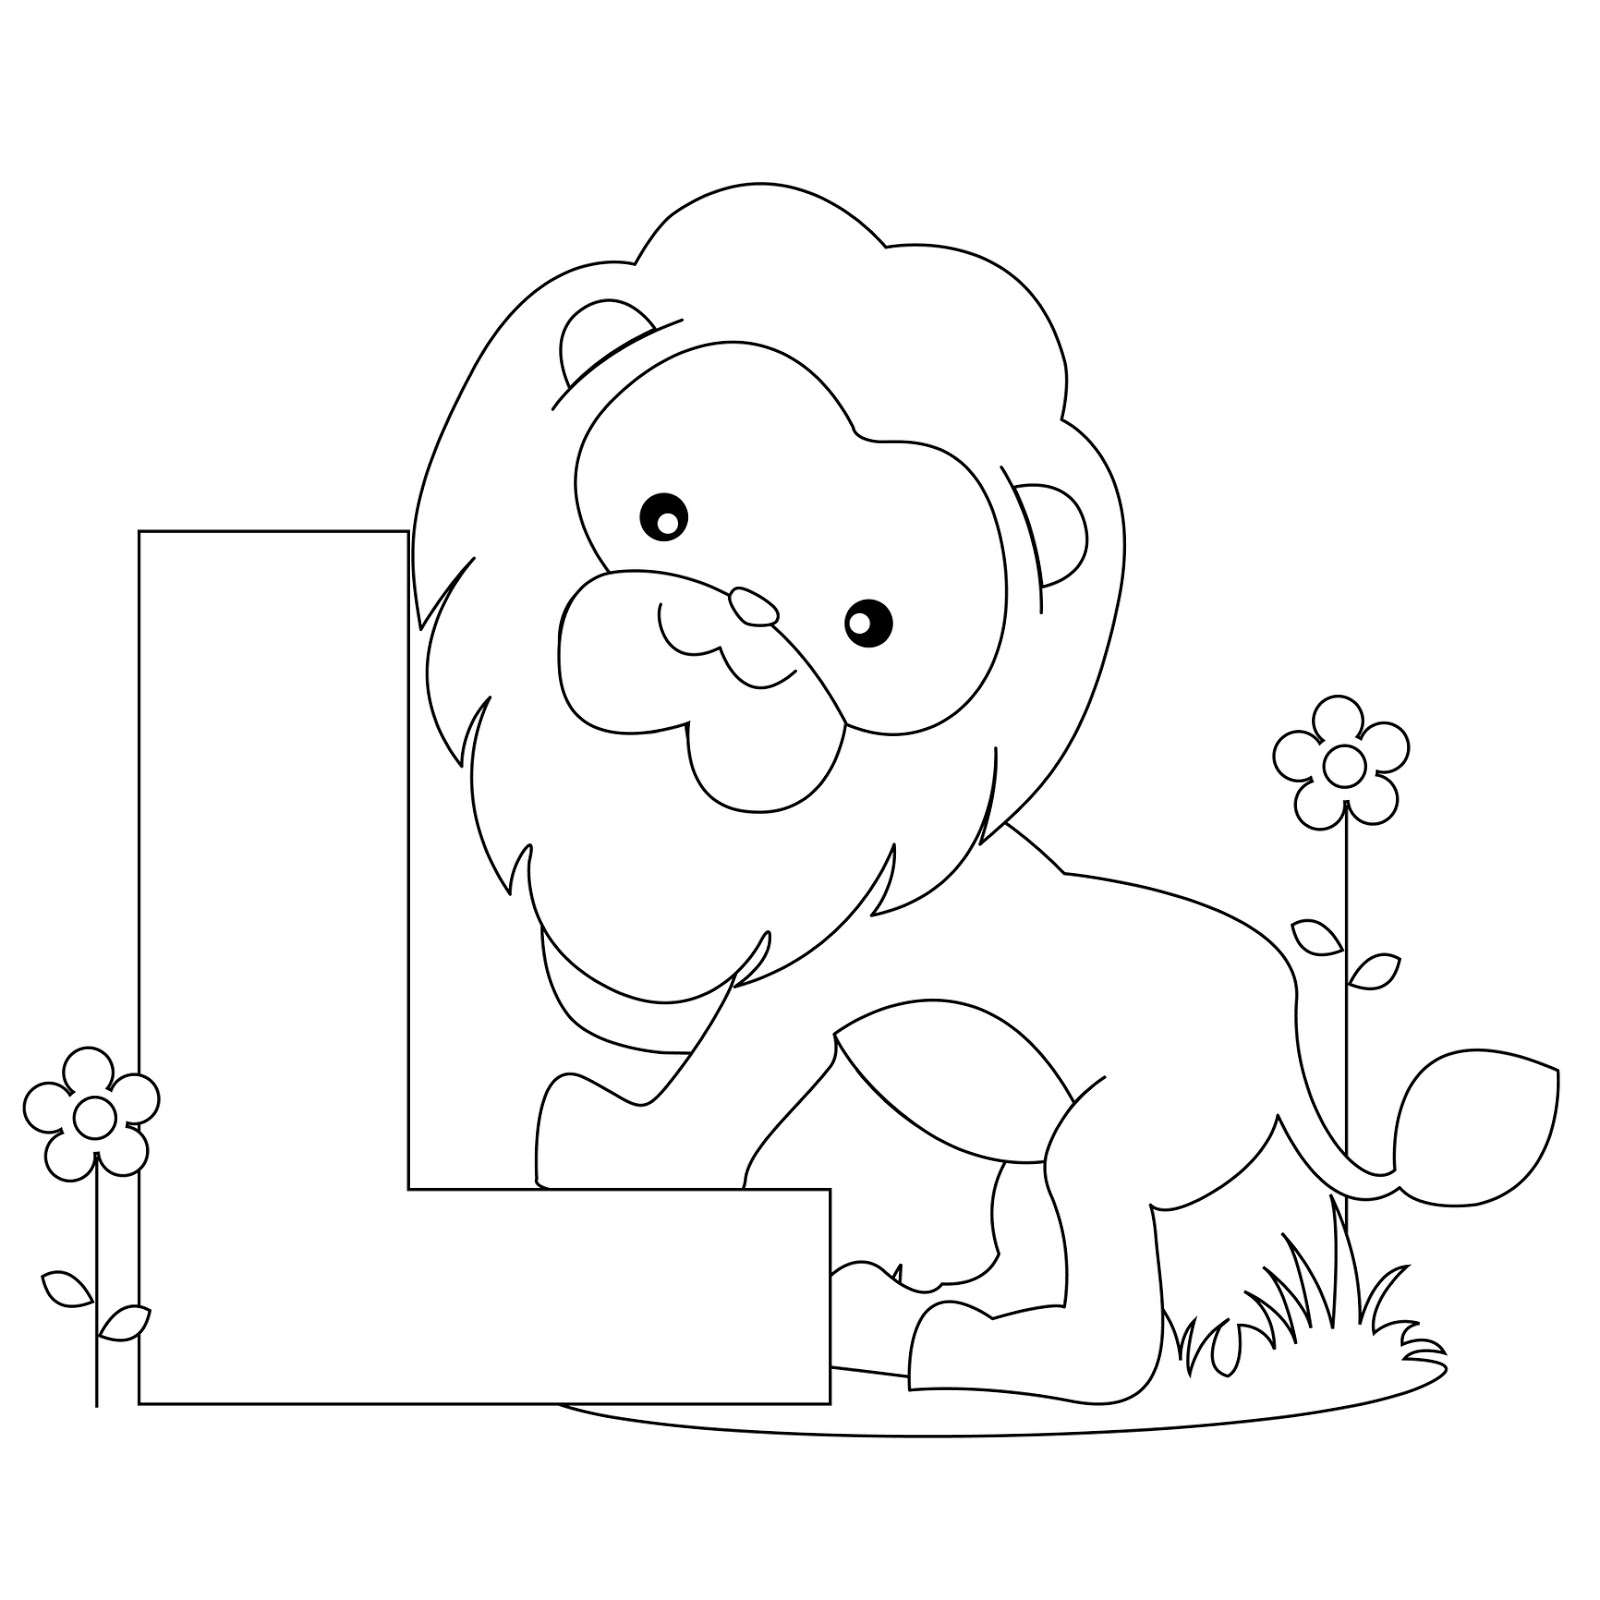 Coloring page: Alphabet (Educational) #124694 - Printable coloring pages